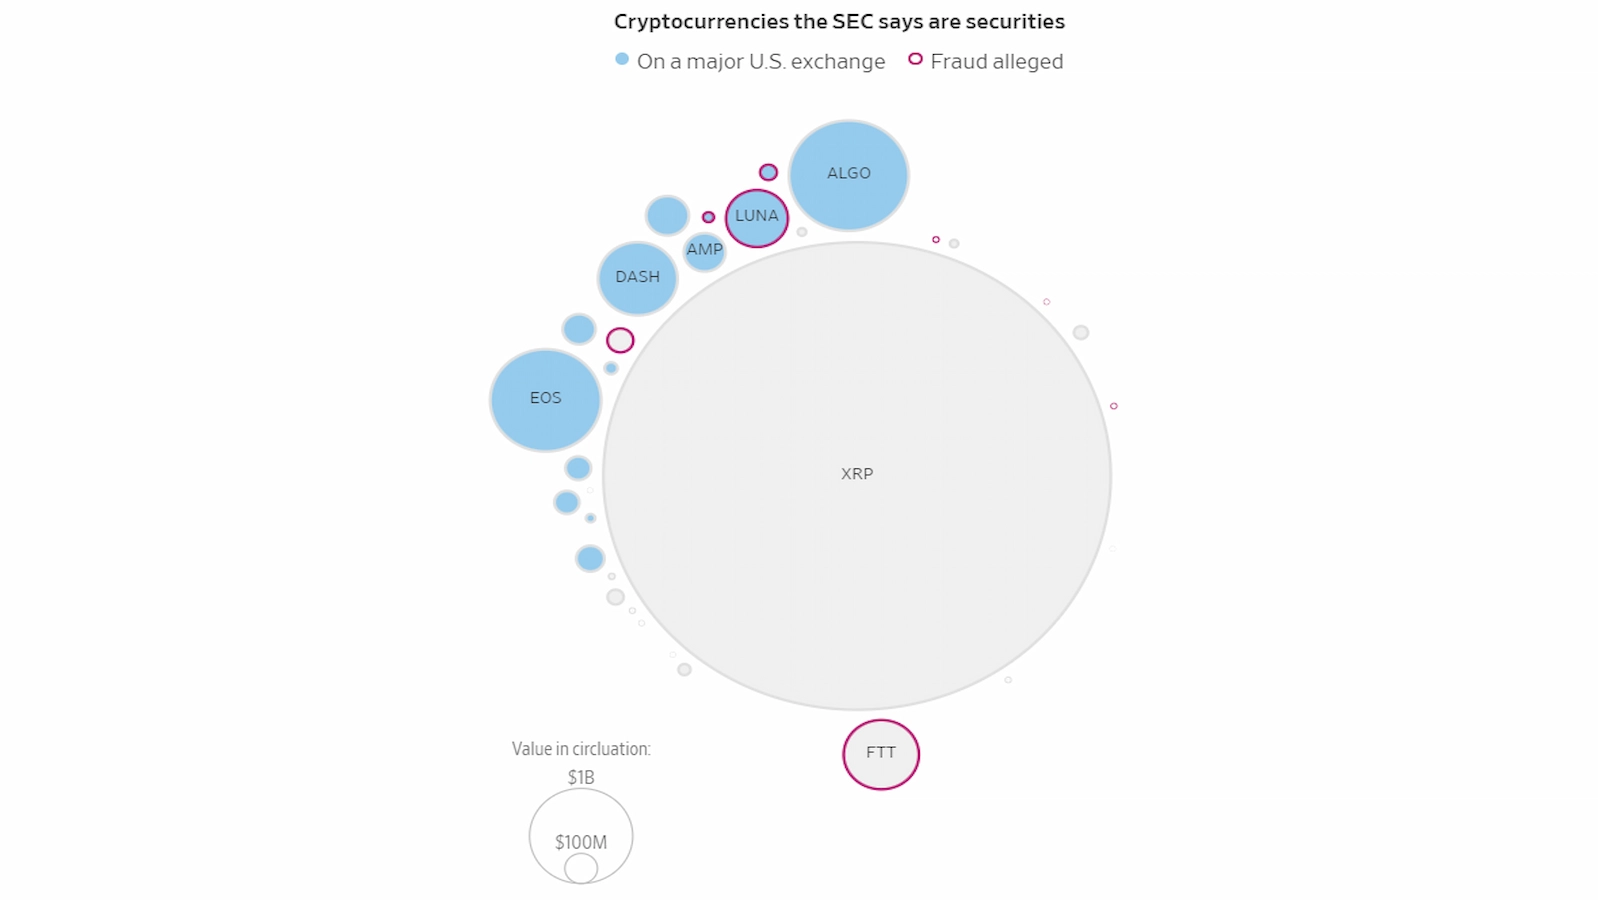 XRP was the largest crypto (by total value) still in circulation that the SEC considers a security.